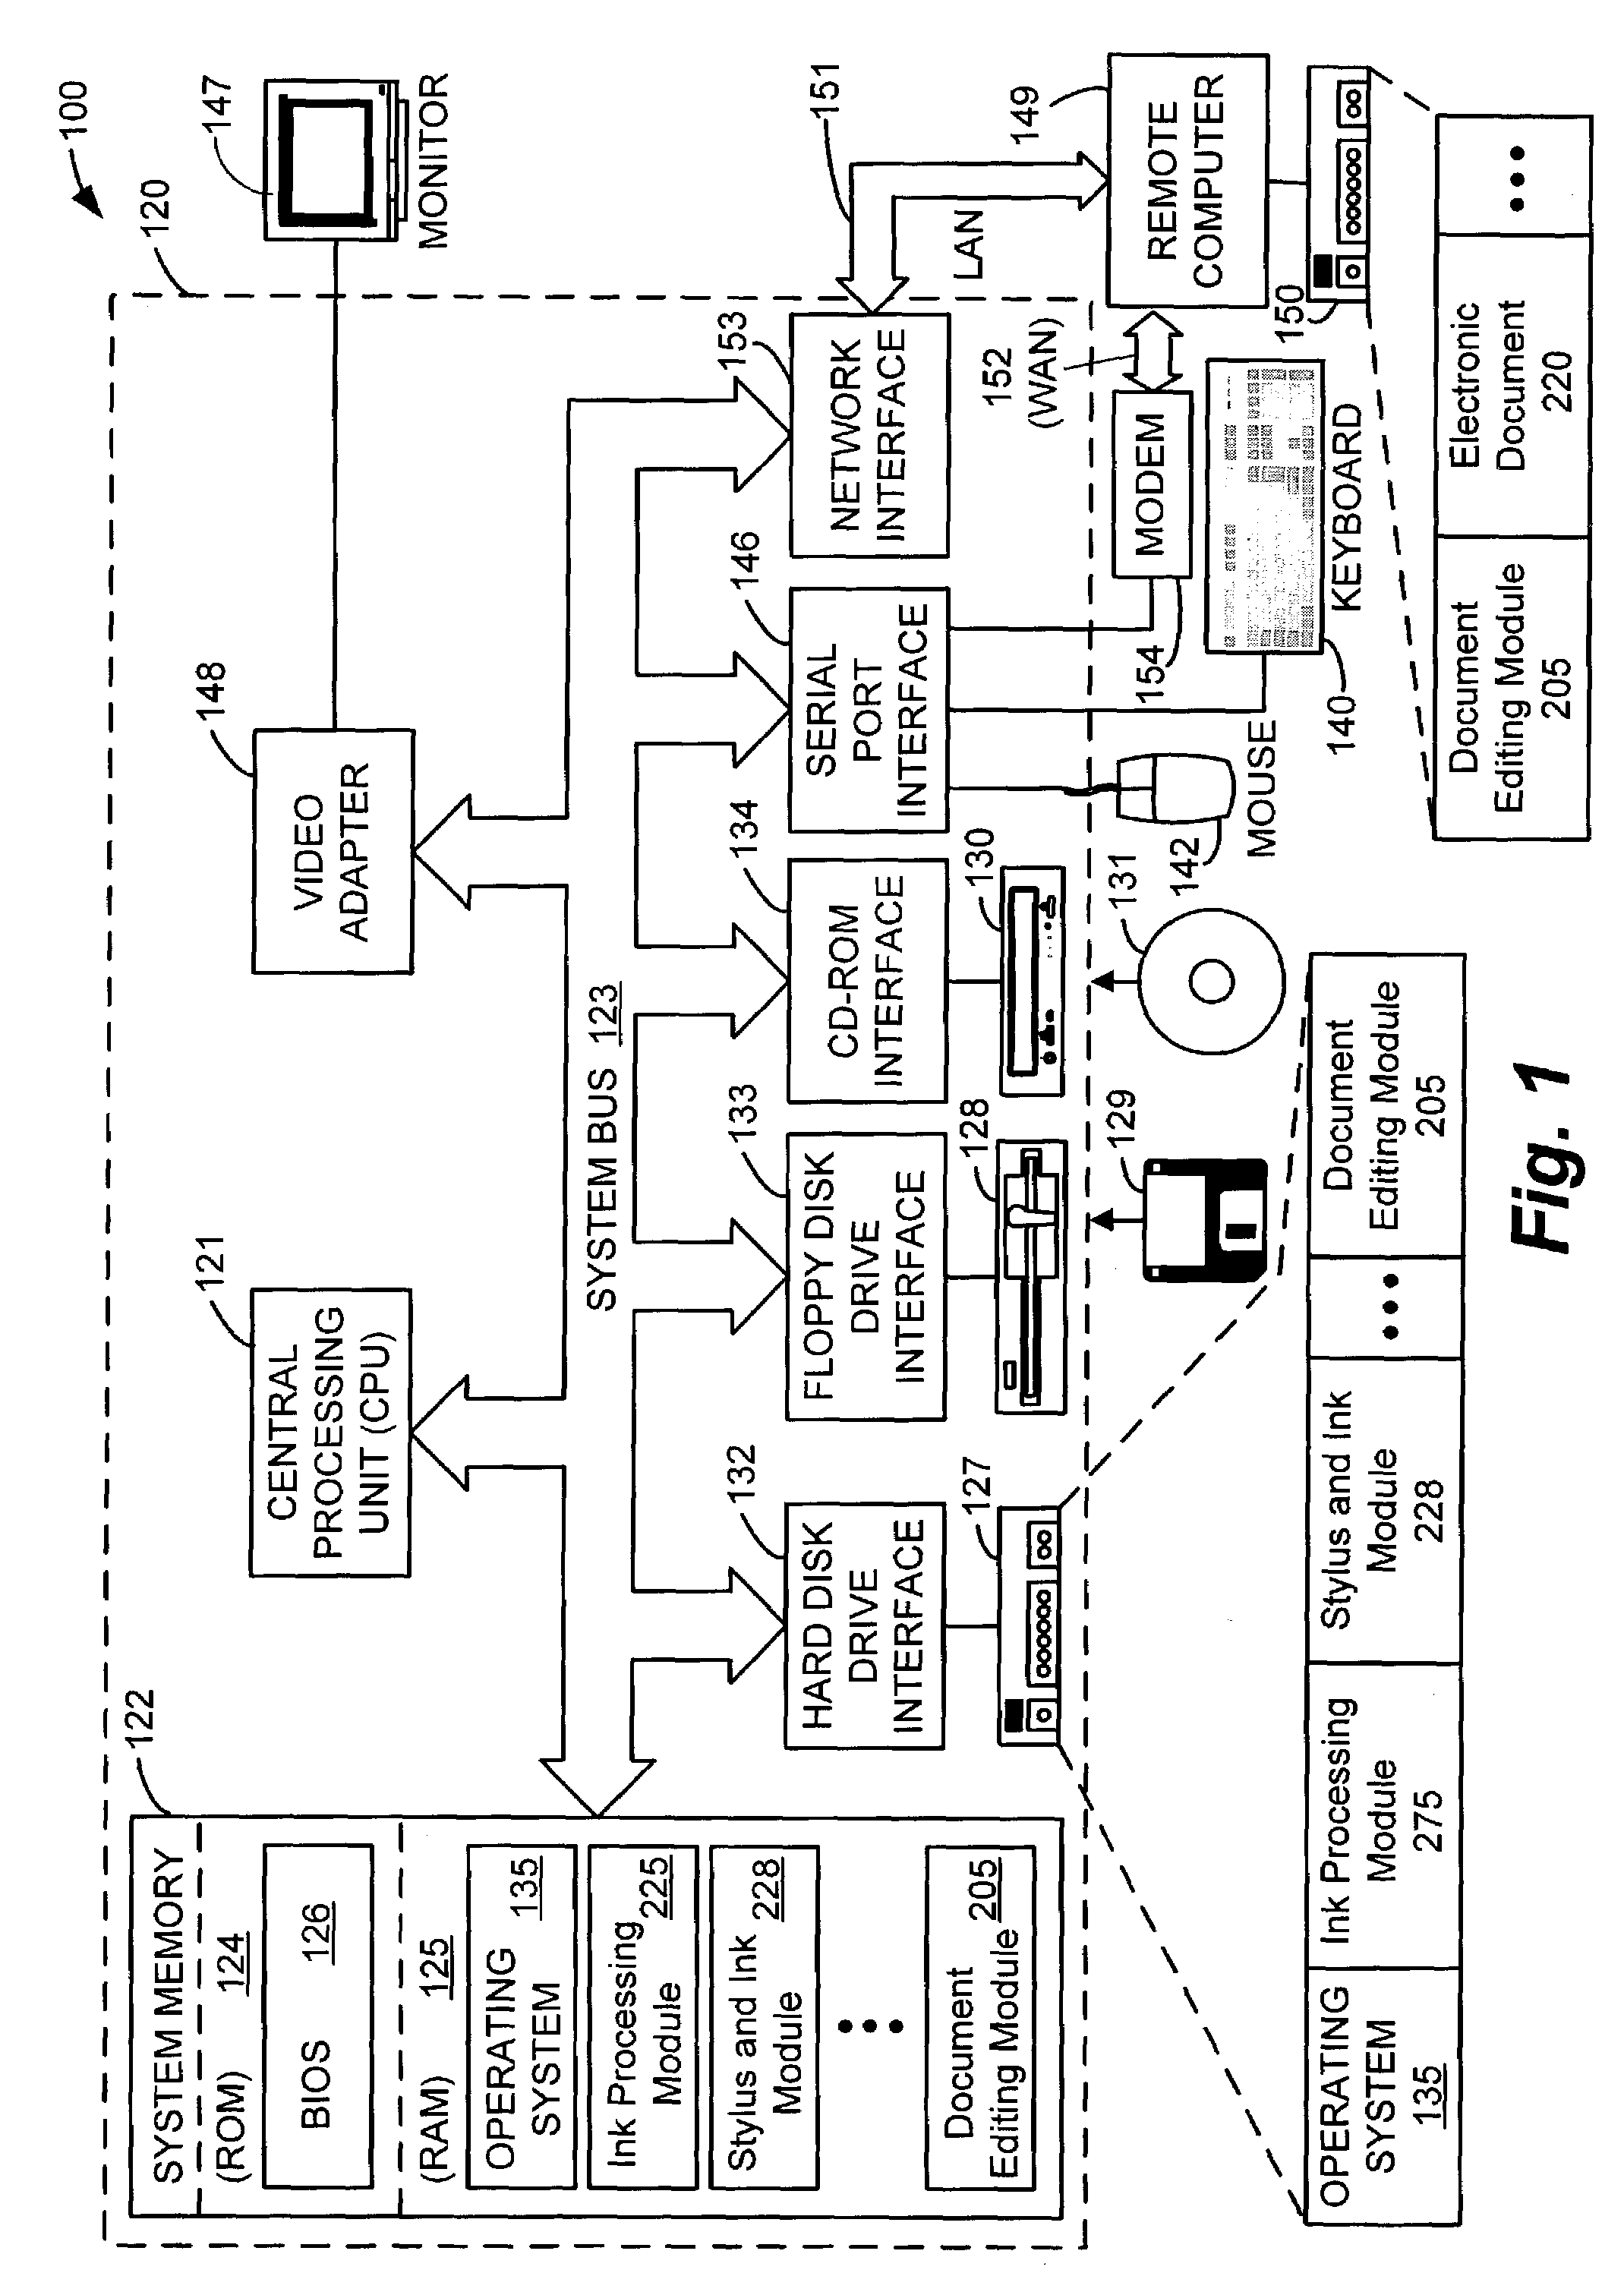 Method and system for automatic insertion of context information into an application program module